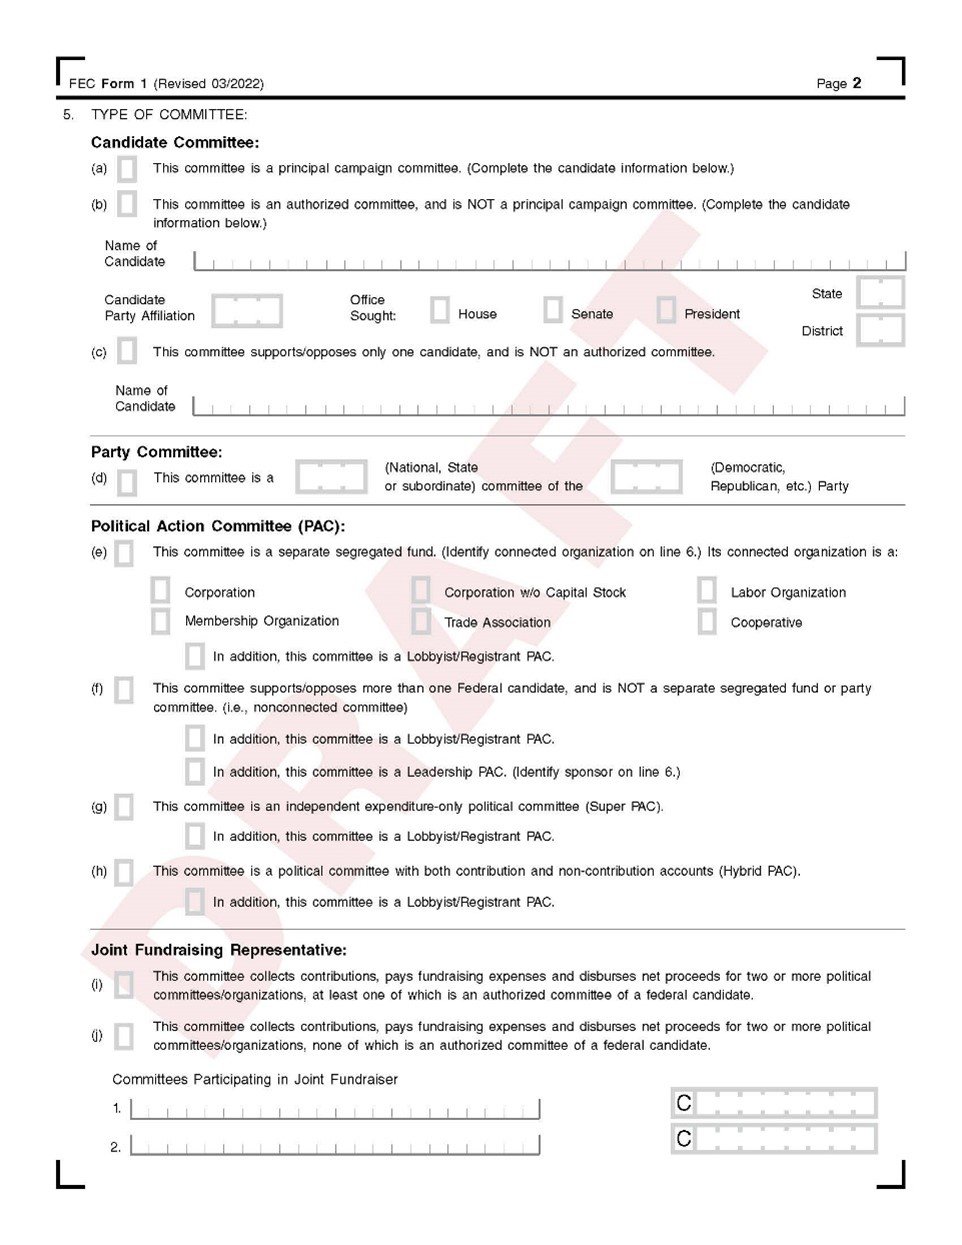 Updated FEC Form 1 Page 2 - Draft